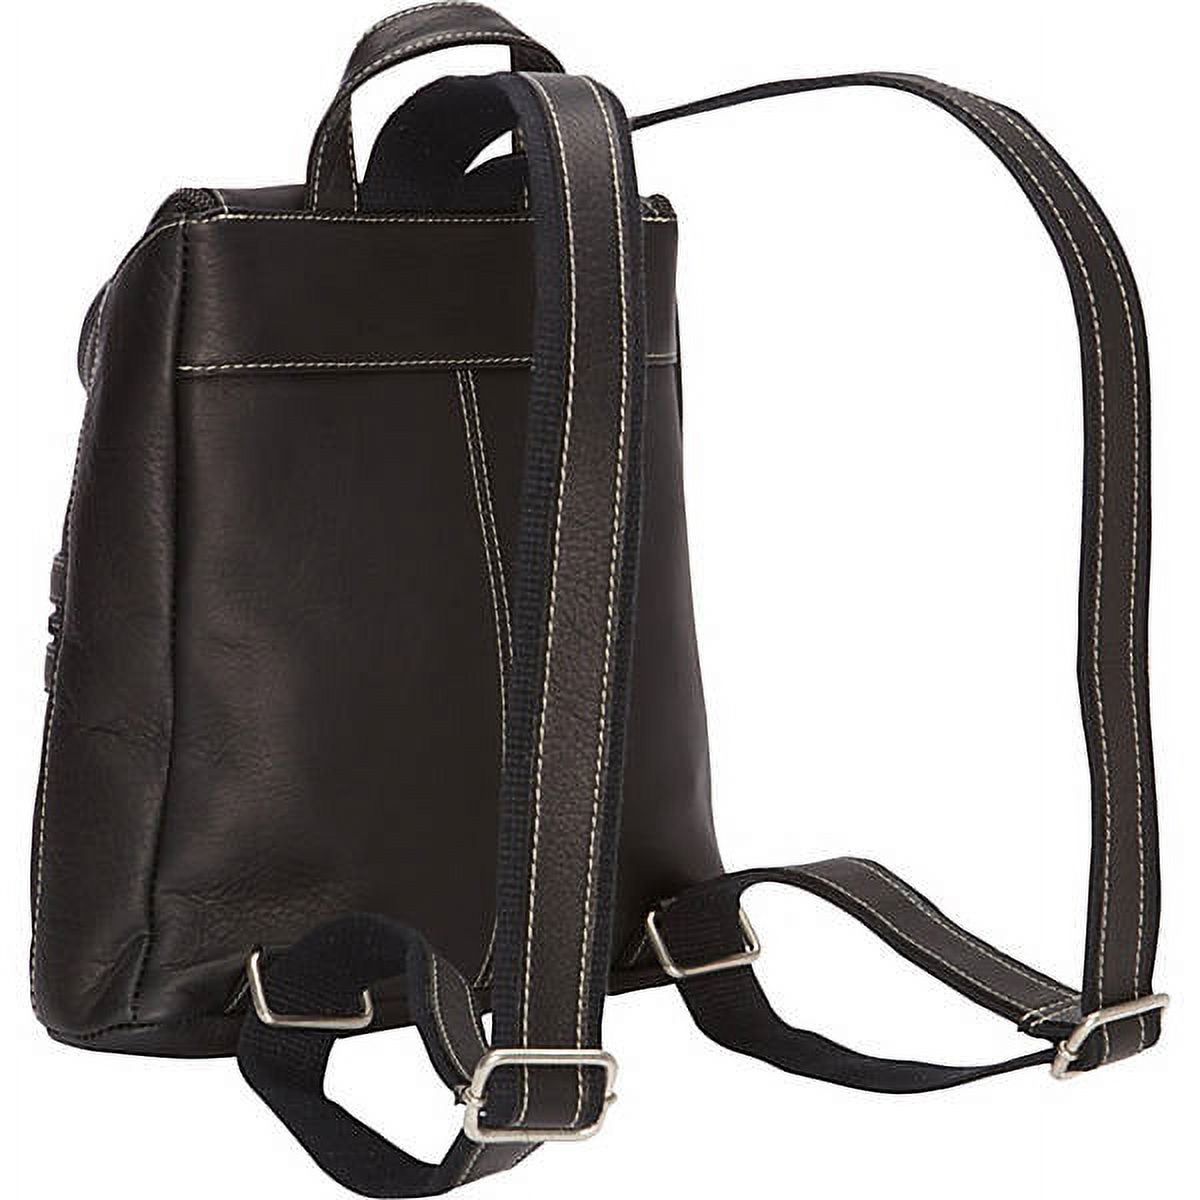 Le Donne Leather Lafayette Classic Backpack LD-9108 - image 4 of 5